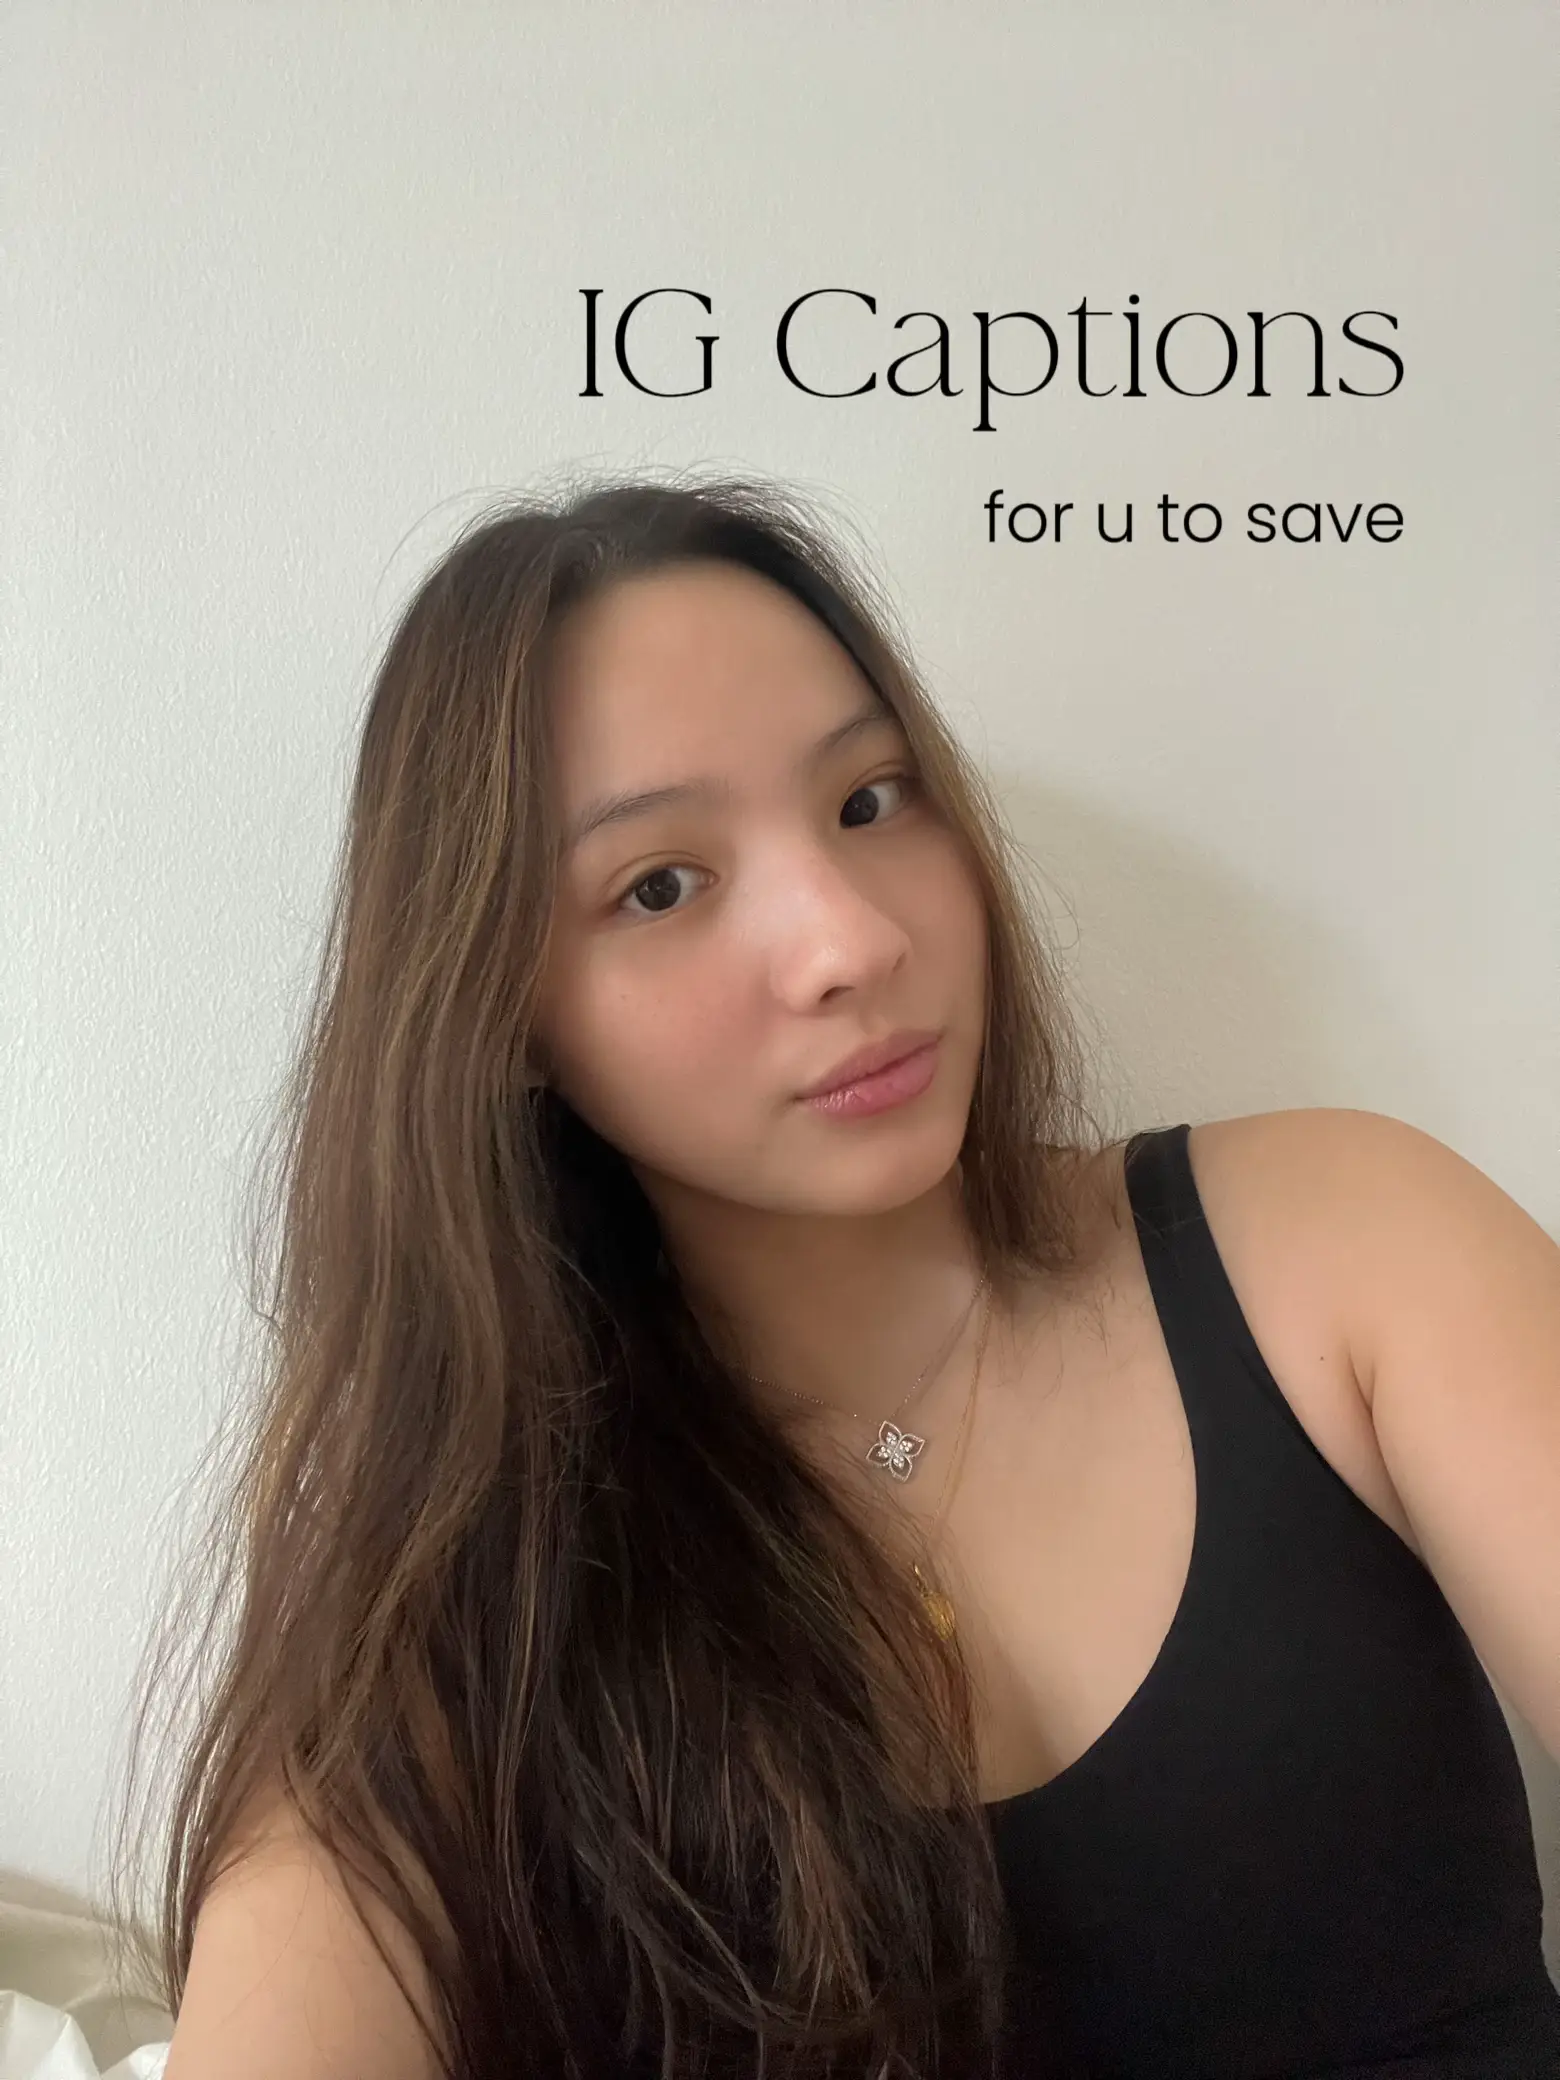 SAVE this list of CAPTIONS for ur next ig post 🎀's images